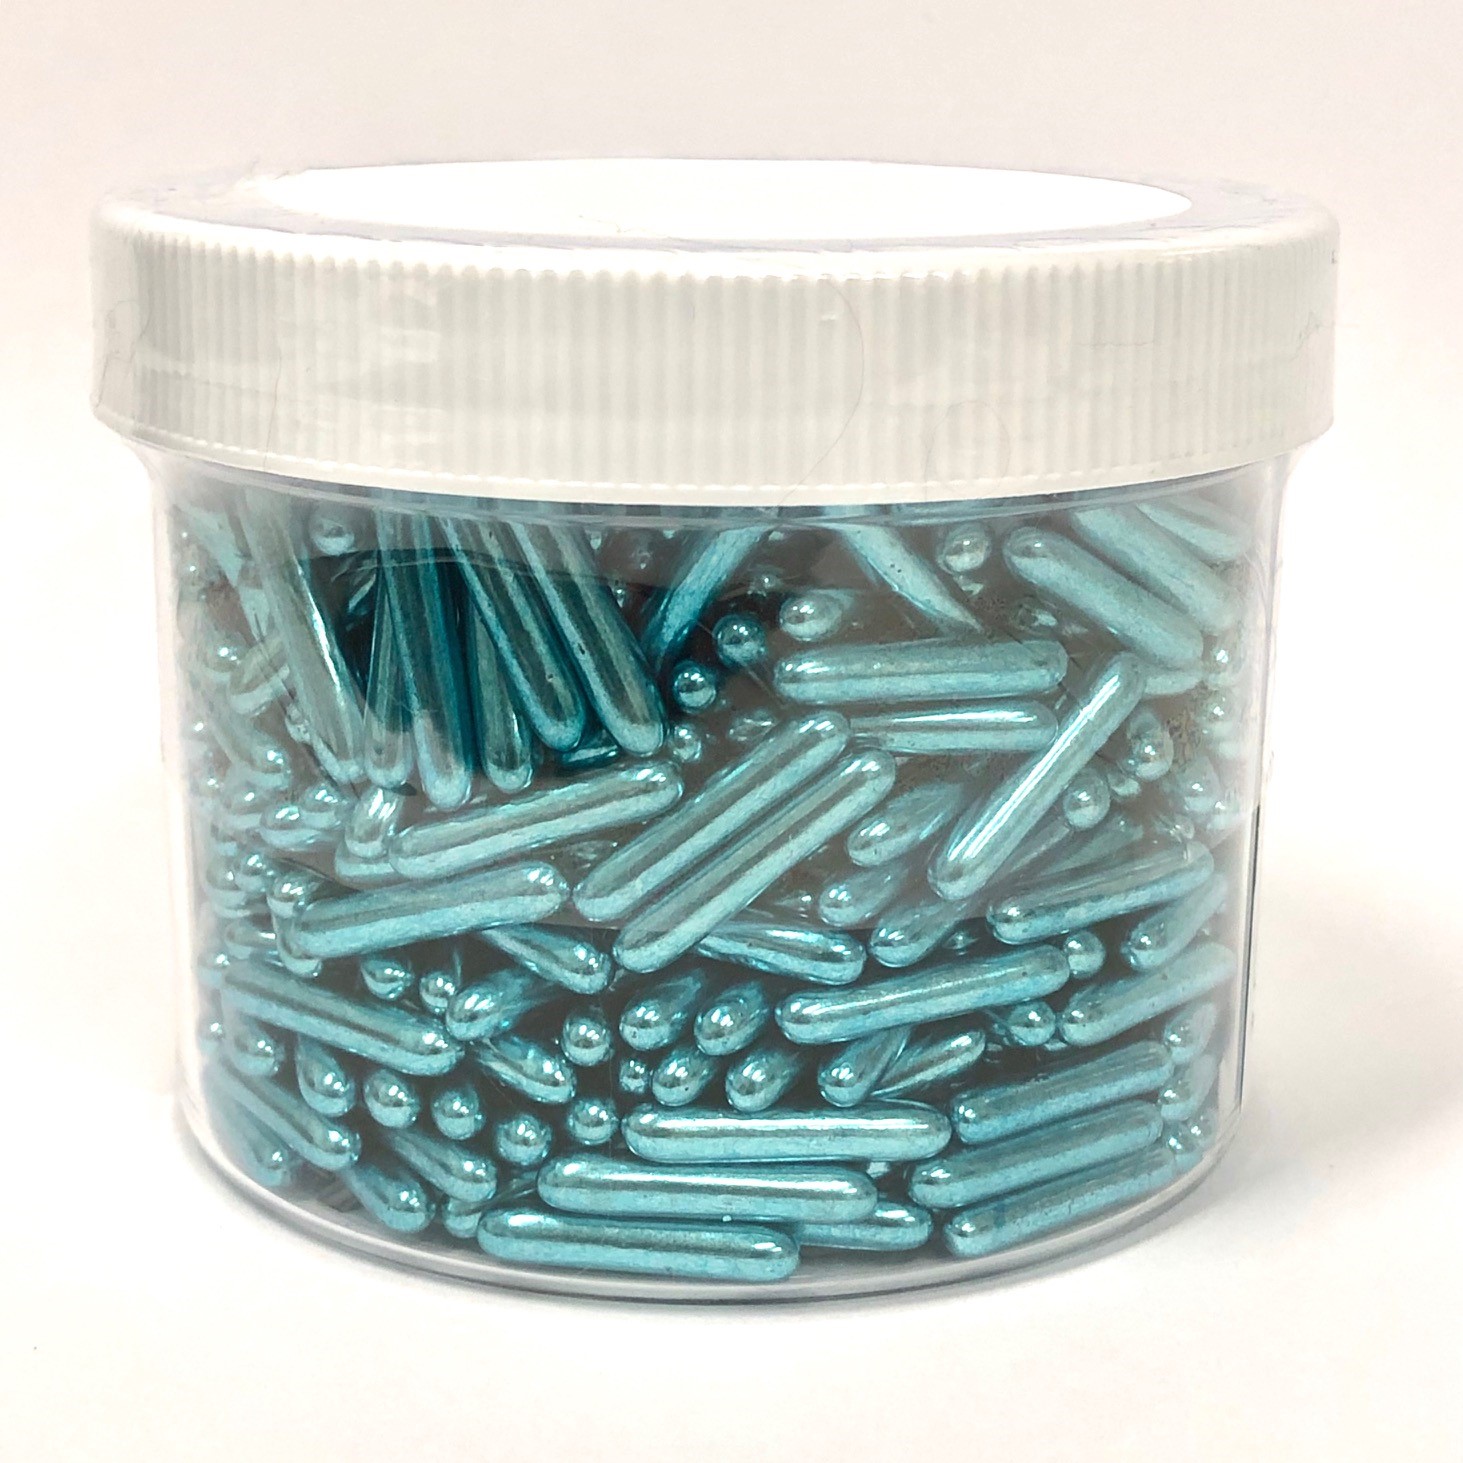 Metallic Turquoise Macaroni Rods - 250g by Confectioners Choice